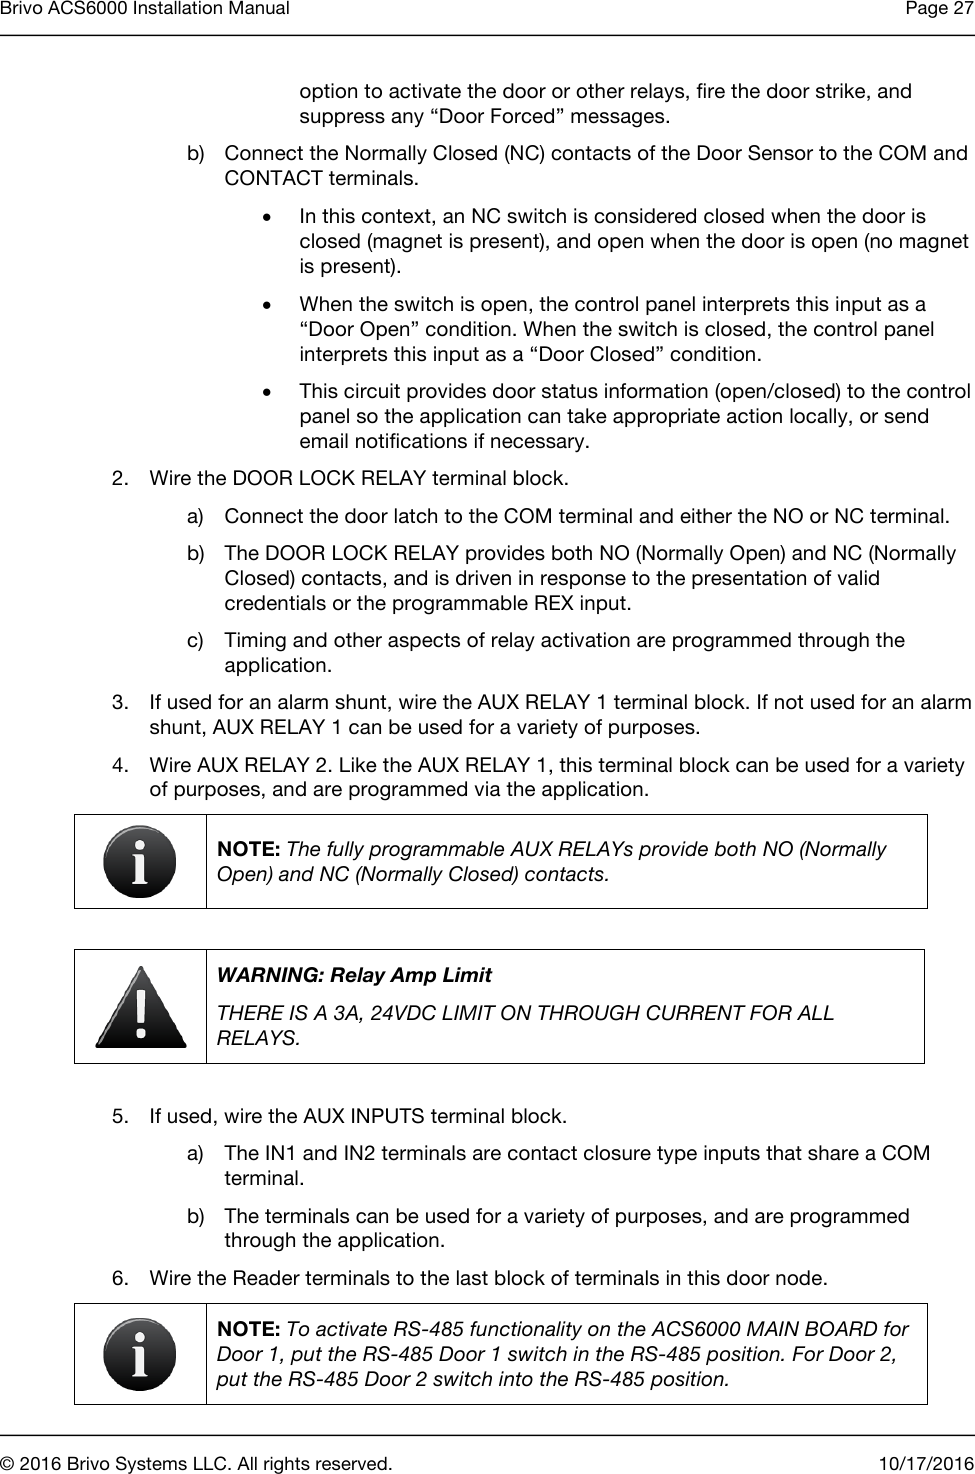 Brivo ACS6000 Installation Manual Page 27      © 2016 Brivo Systems LLC. All rights reserved. 10/17/2016  option to activate the door or other relays, fire the door strike, and suppress any “Door Forced” messages.   b) Connect the Normally Closed (NC) contacts of the Door Sensor to the COM and CONTACT terminals. • In this context, an NC switch is considered closed when the door is closed (magnet is present), and open when the door is open (no magnet is present).  • When the switch is open, the control panel interprets this input as a “Door Open” condition. When the switch is closed, the control panel interprets this input as a “Door Closed” condition. • This circuit provides door status information (open/closed) to the control panel so the application can take appropriate action locally, or send email notifications if necessary.  2. Wire the DOOR LOCK RELAY terminal block. a) Connect the door latch to the COM terminal and either the NO or NC terminal. b) The DOOR LOCK RELAY provides both NO (Normally Open) and NC (Normally Closed) contacts, and is driven in response to the presentation of valid credentials or the programmable REX input. c) Timing and other aspects of relay activation are programmed through the application. 3. If used for an alarm shunt, wire the AUX RELAY 1 terminal block. If not used for an alarm shunt, AUX RELAY 1 can be used for a variety of purposes. 4. Wire AUX RELAY 2. Like the AUX RELAY 1, this terminal block can be used for a variety of purposes, and are programmed via the application.  NOTE: The fully programmable AUX RELAYs provide both NO (Normally Open) and NC (Normally Closed) contacts.   WARNING: Relay Amp Limit THERE IS A 3A, 24VDC LIMIT ON THROUGH CURRENT FOR ALL RELAYS.  5. If used, wire the AUX INPUTS terminal block. a) The IN1 and IN2 terminals are contact closure type inputs that share a COM terminal. b) The terminals can be used for a variety of purposes, and are programmed through the application. 6. Wire the Reader terminals to the last block of terminals in this door node.   NOTE: To activate RS-485 functionality on the ACS6000 MAIN BOARD for Door 1, put the RS-485 Door 1 switch in the RS-485 position. For Door 2, put the RS-485 Door 2 switch into the RS-485 position. 